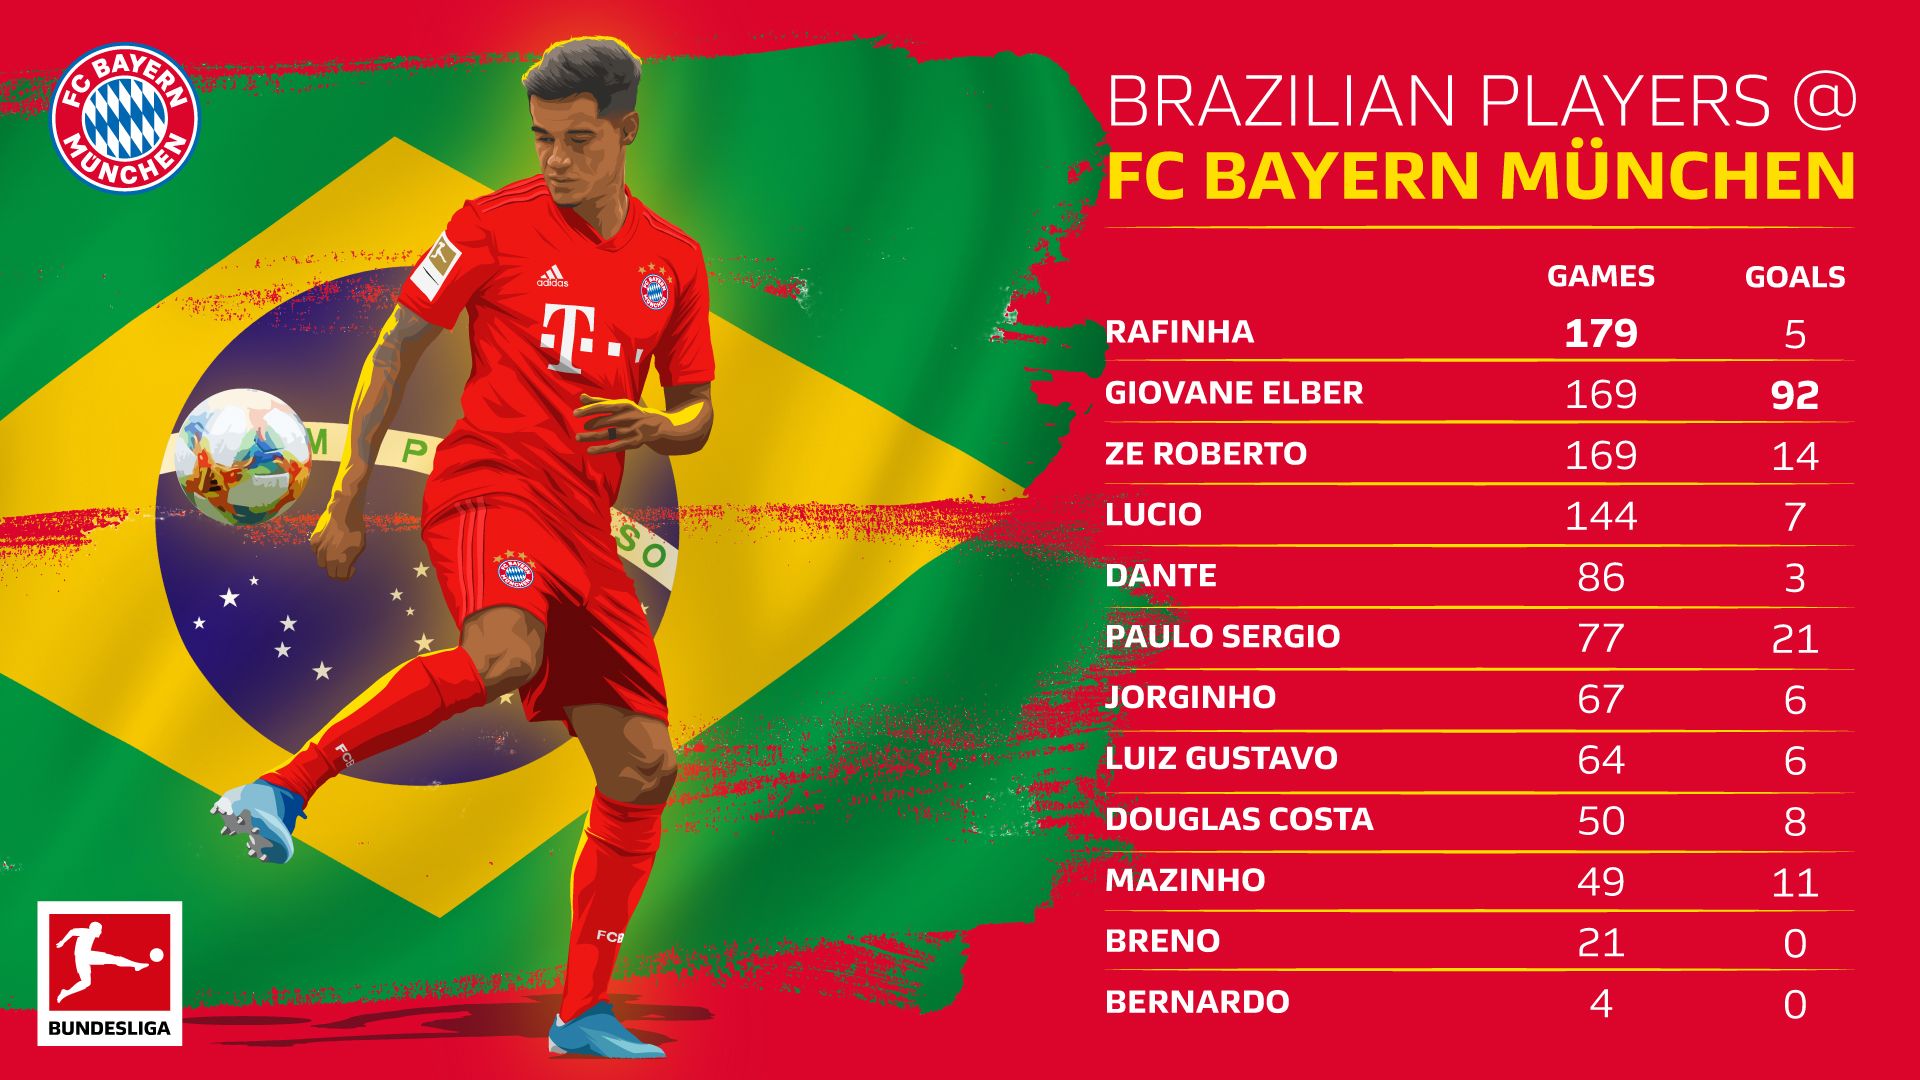 Will Philippe Coutinho be lucky number 13 of Bayern's Brazilians